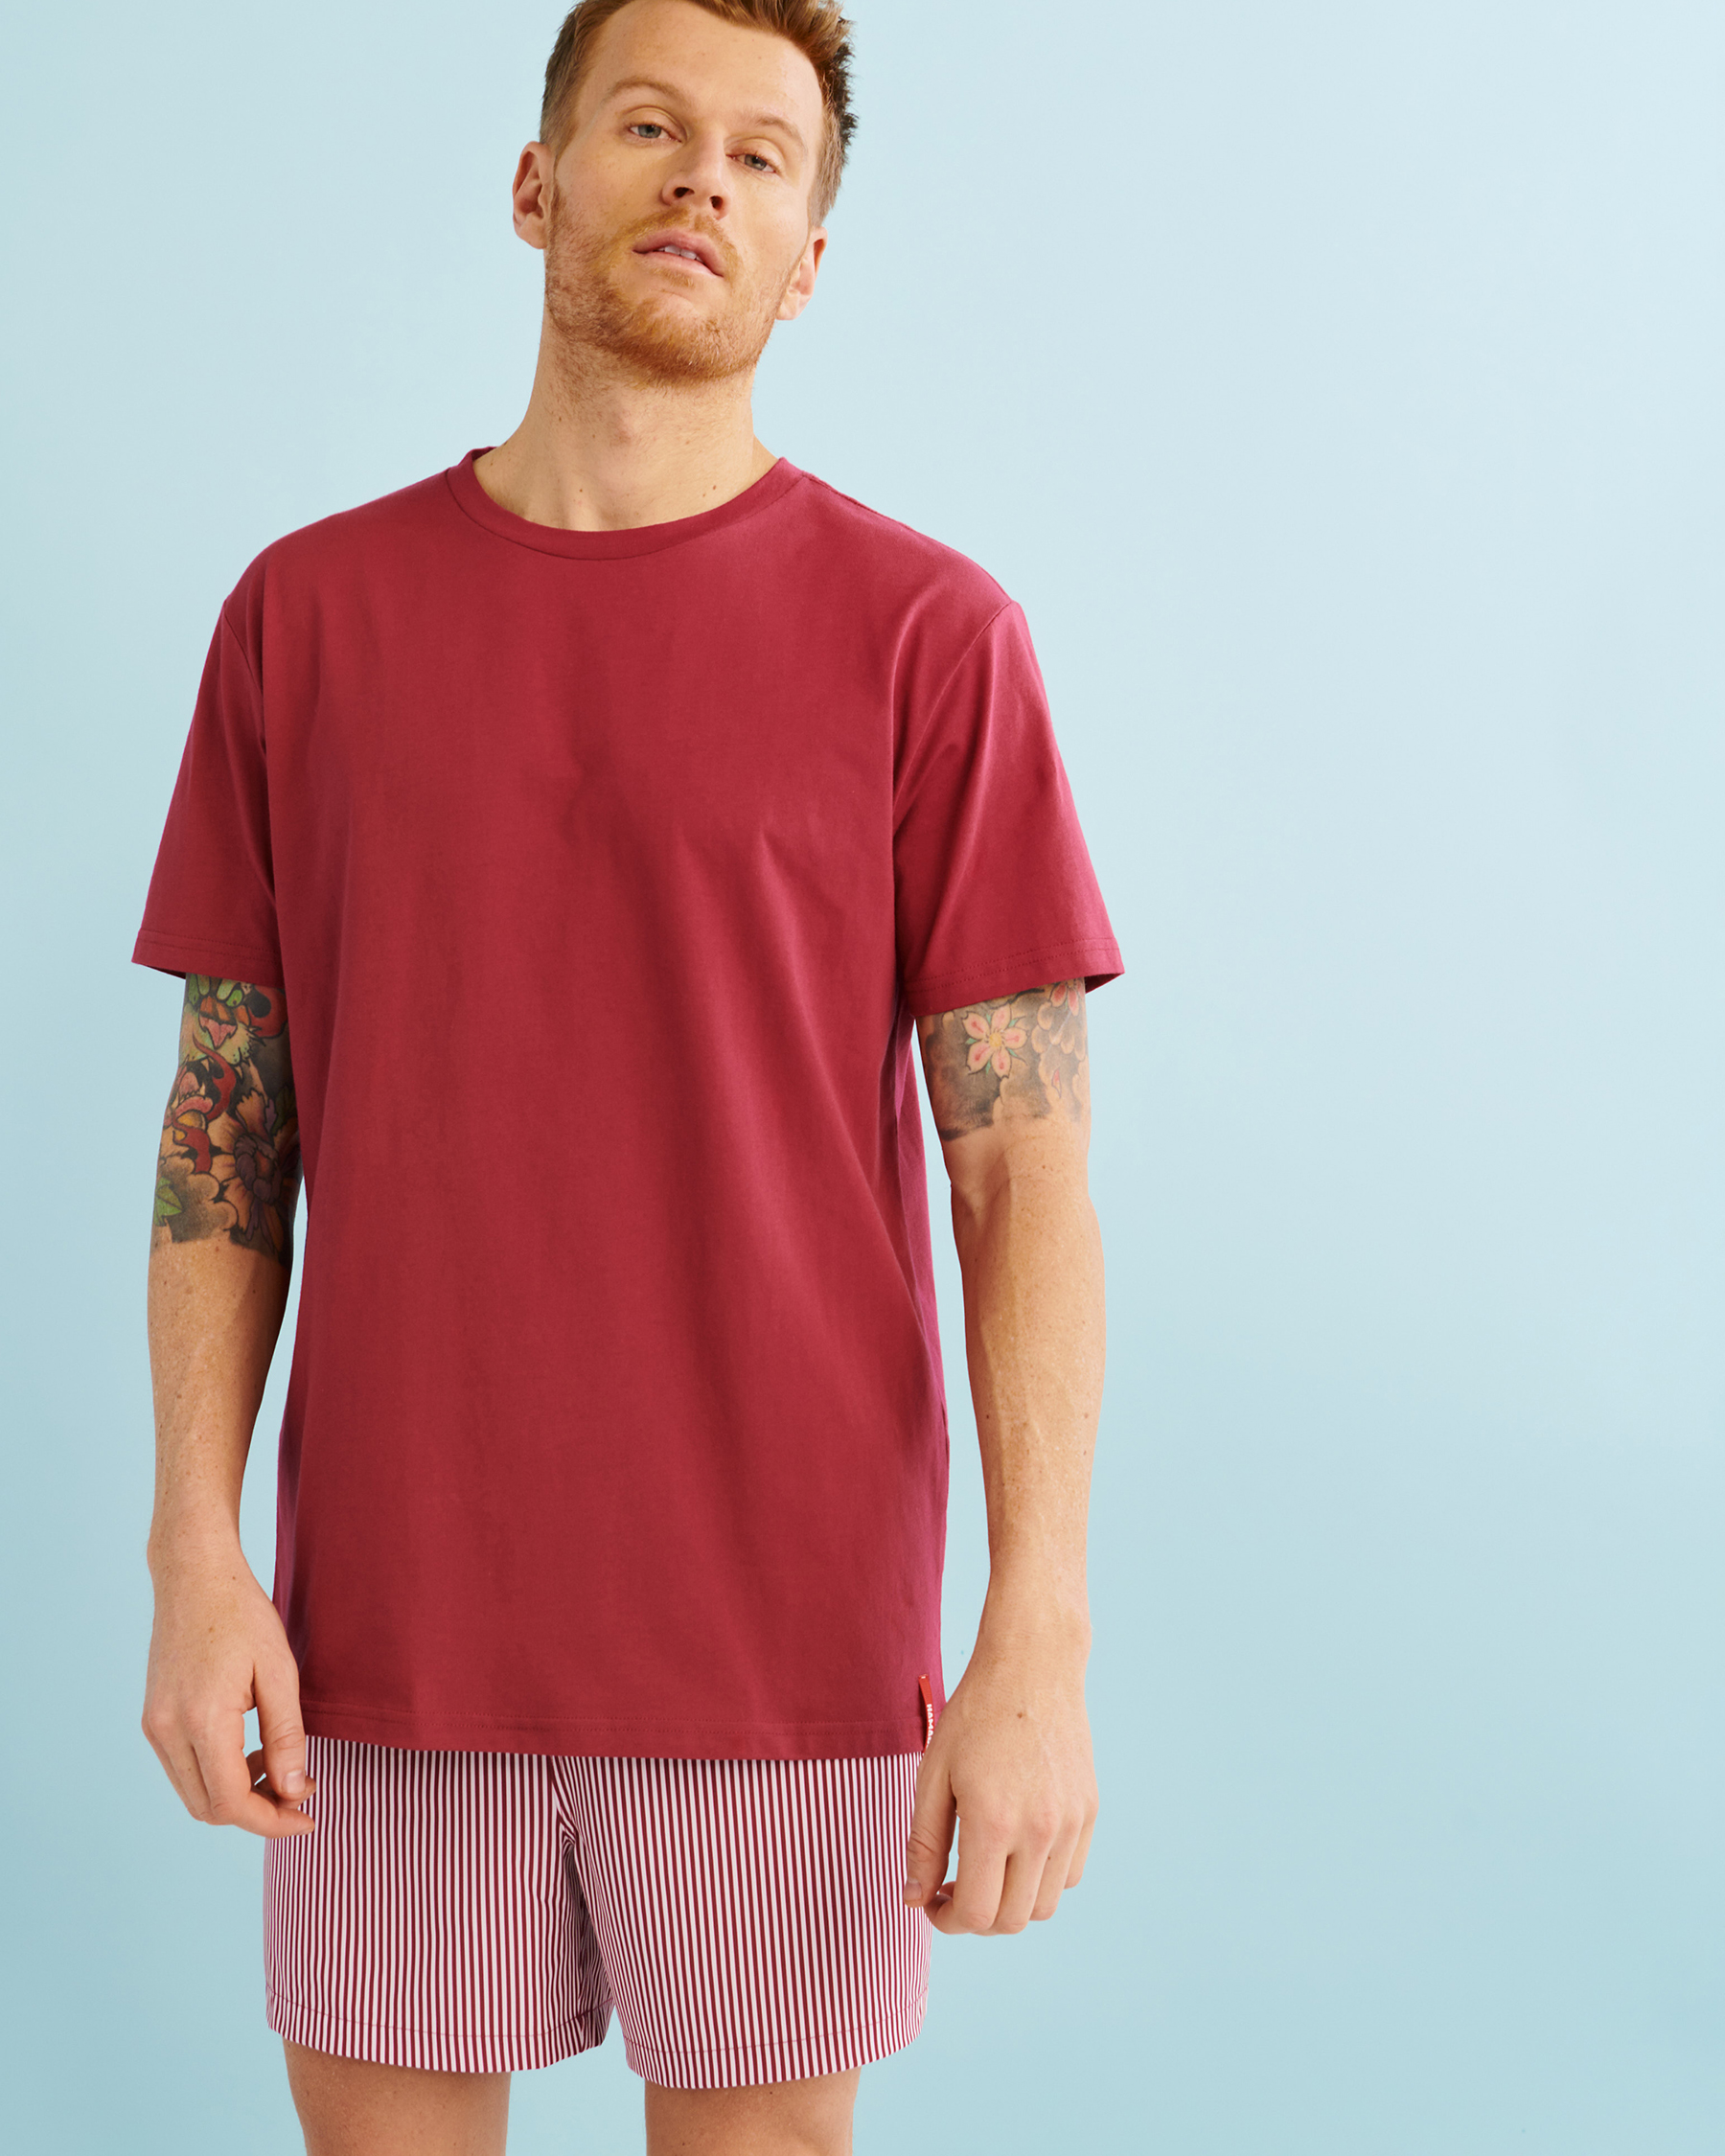 HAMABE Classic T-shirt Red 04100002 - View4